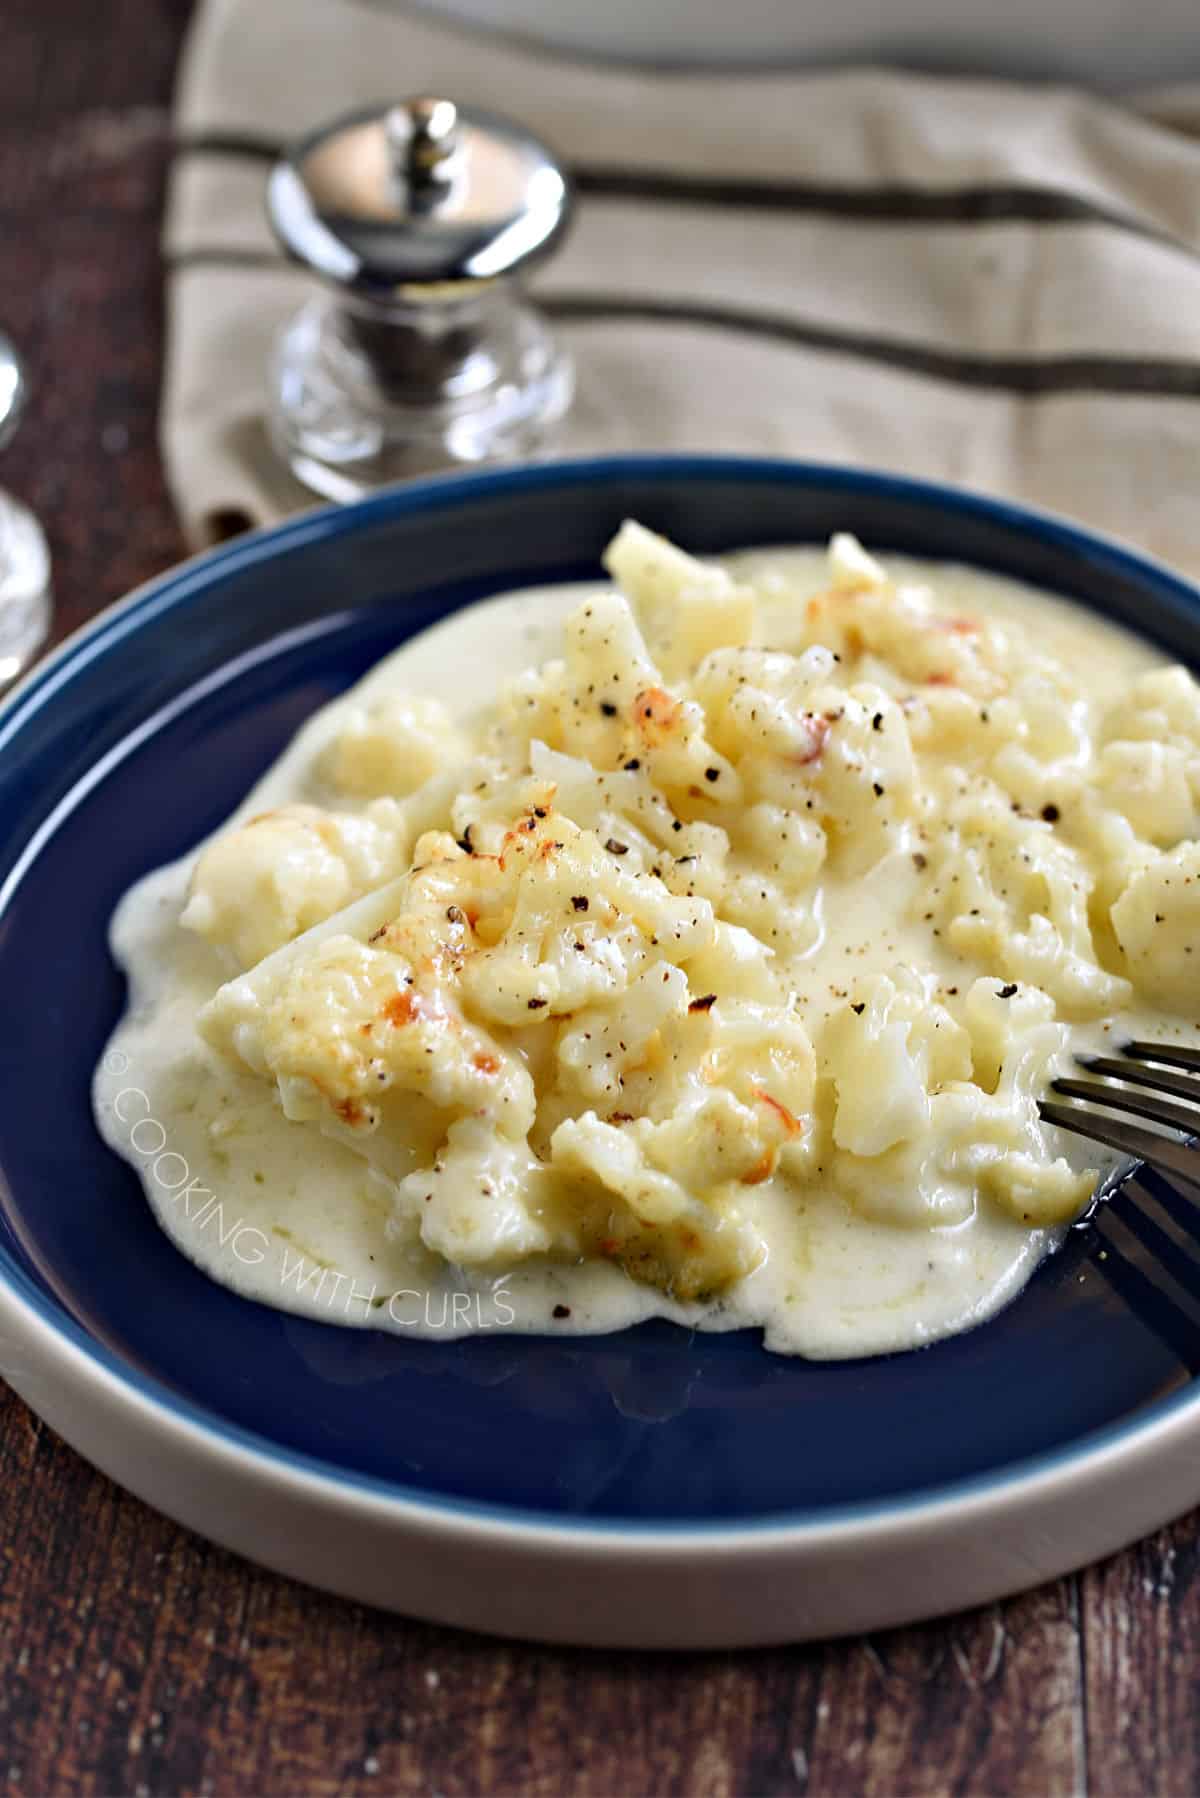 Cauliflower pieces topped with a creamy cheese sauce on a blue plate with a black fork poking in on the right side.